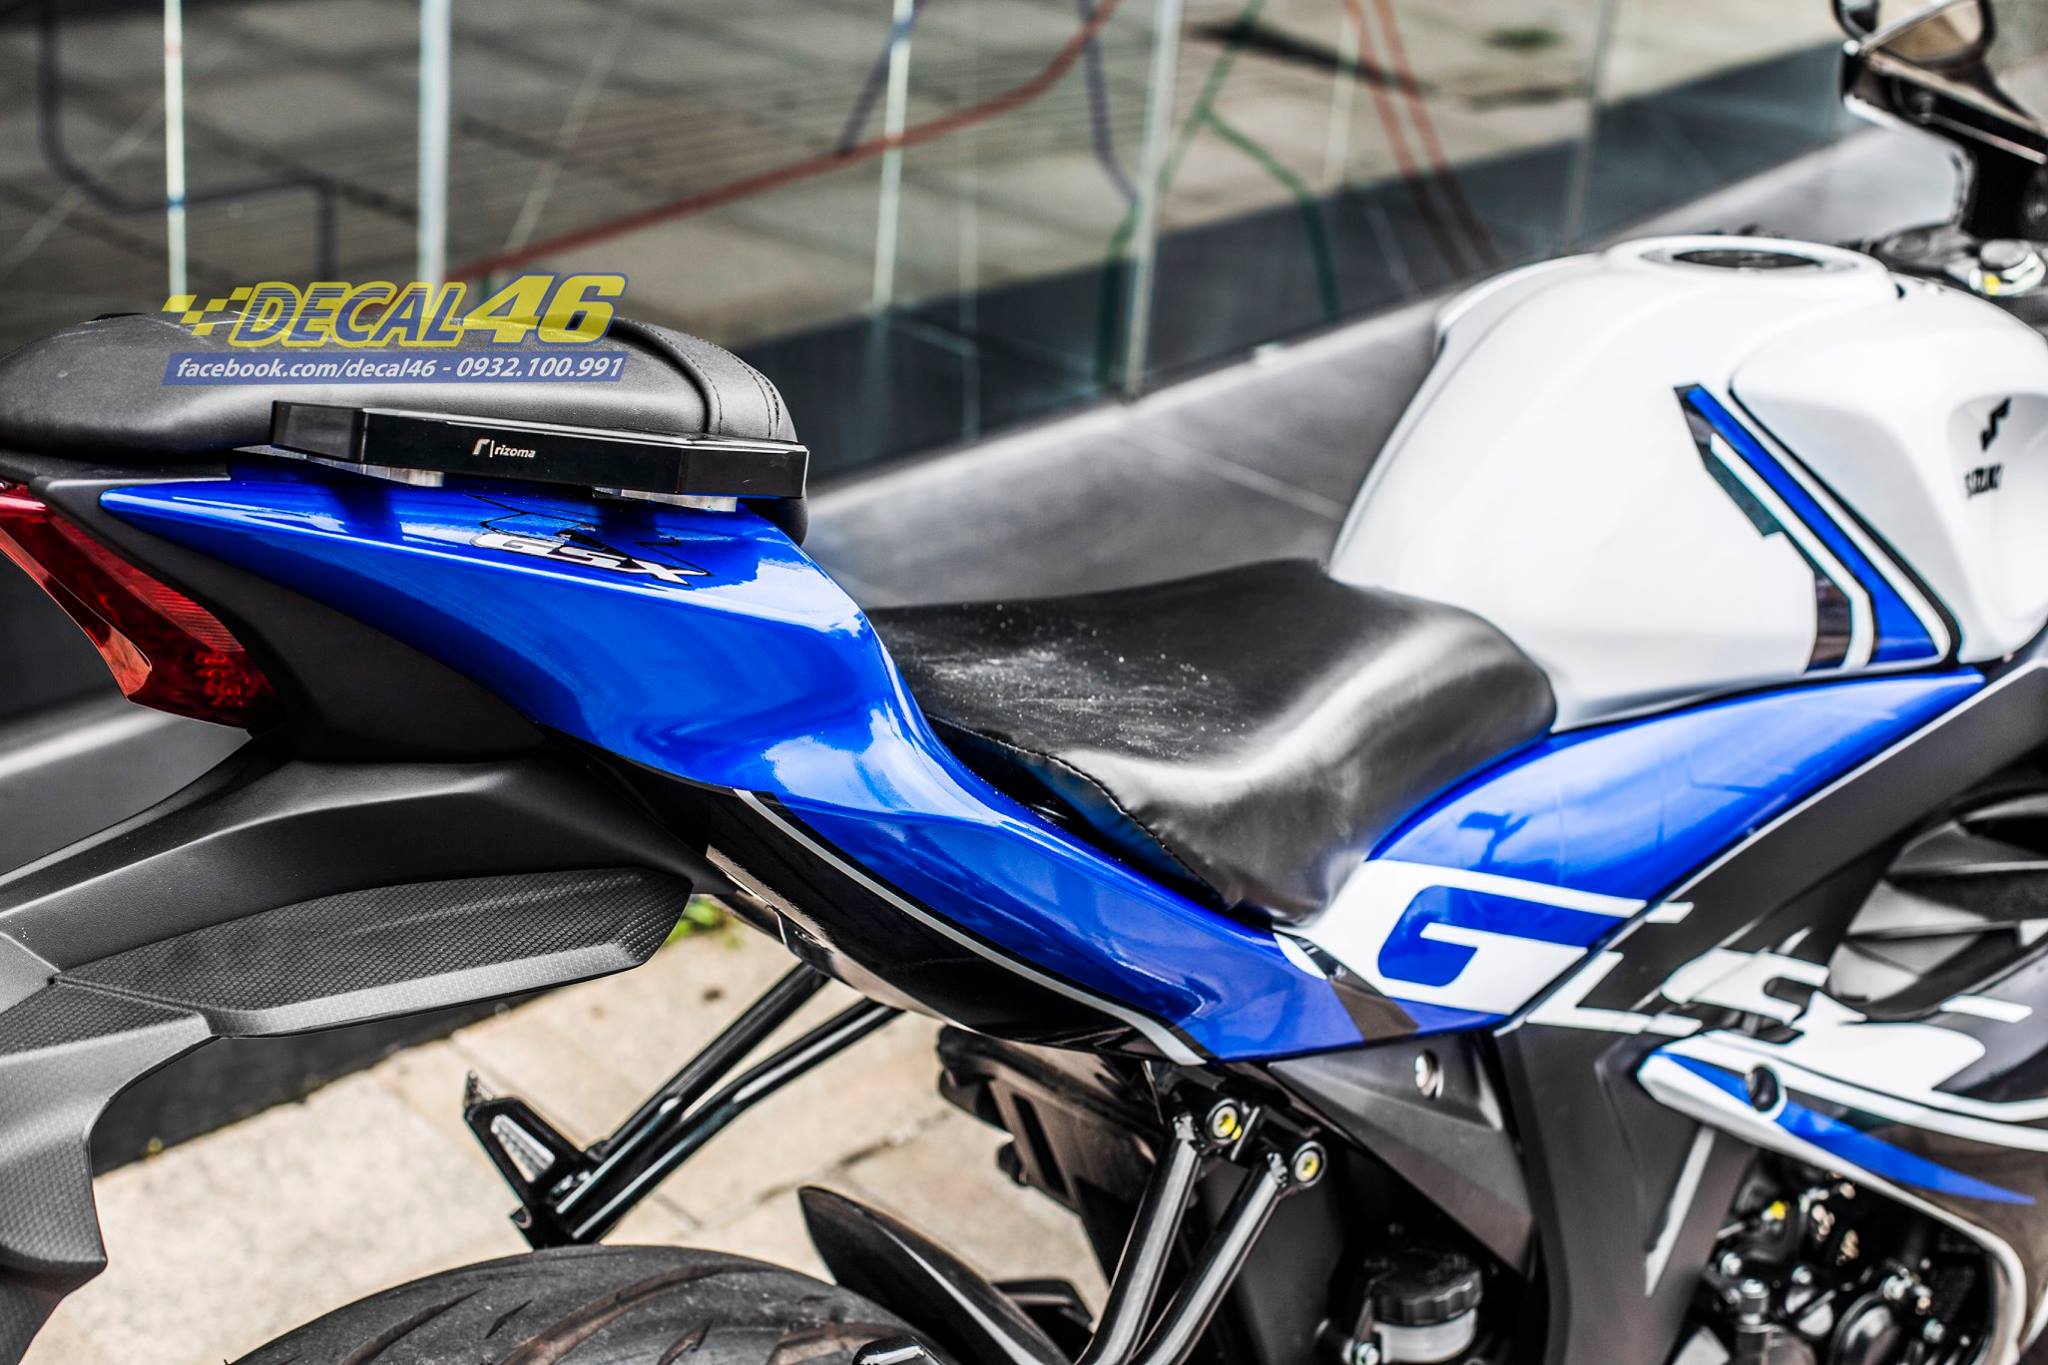 This Suzuki R150 is Equipped with an Akrapovic Exhaust and a Face Kit - wide